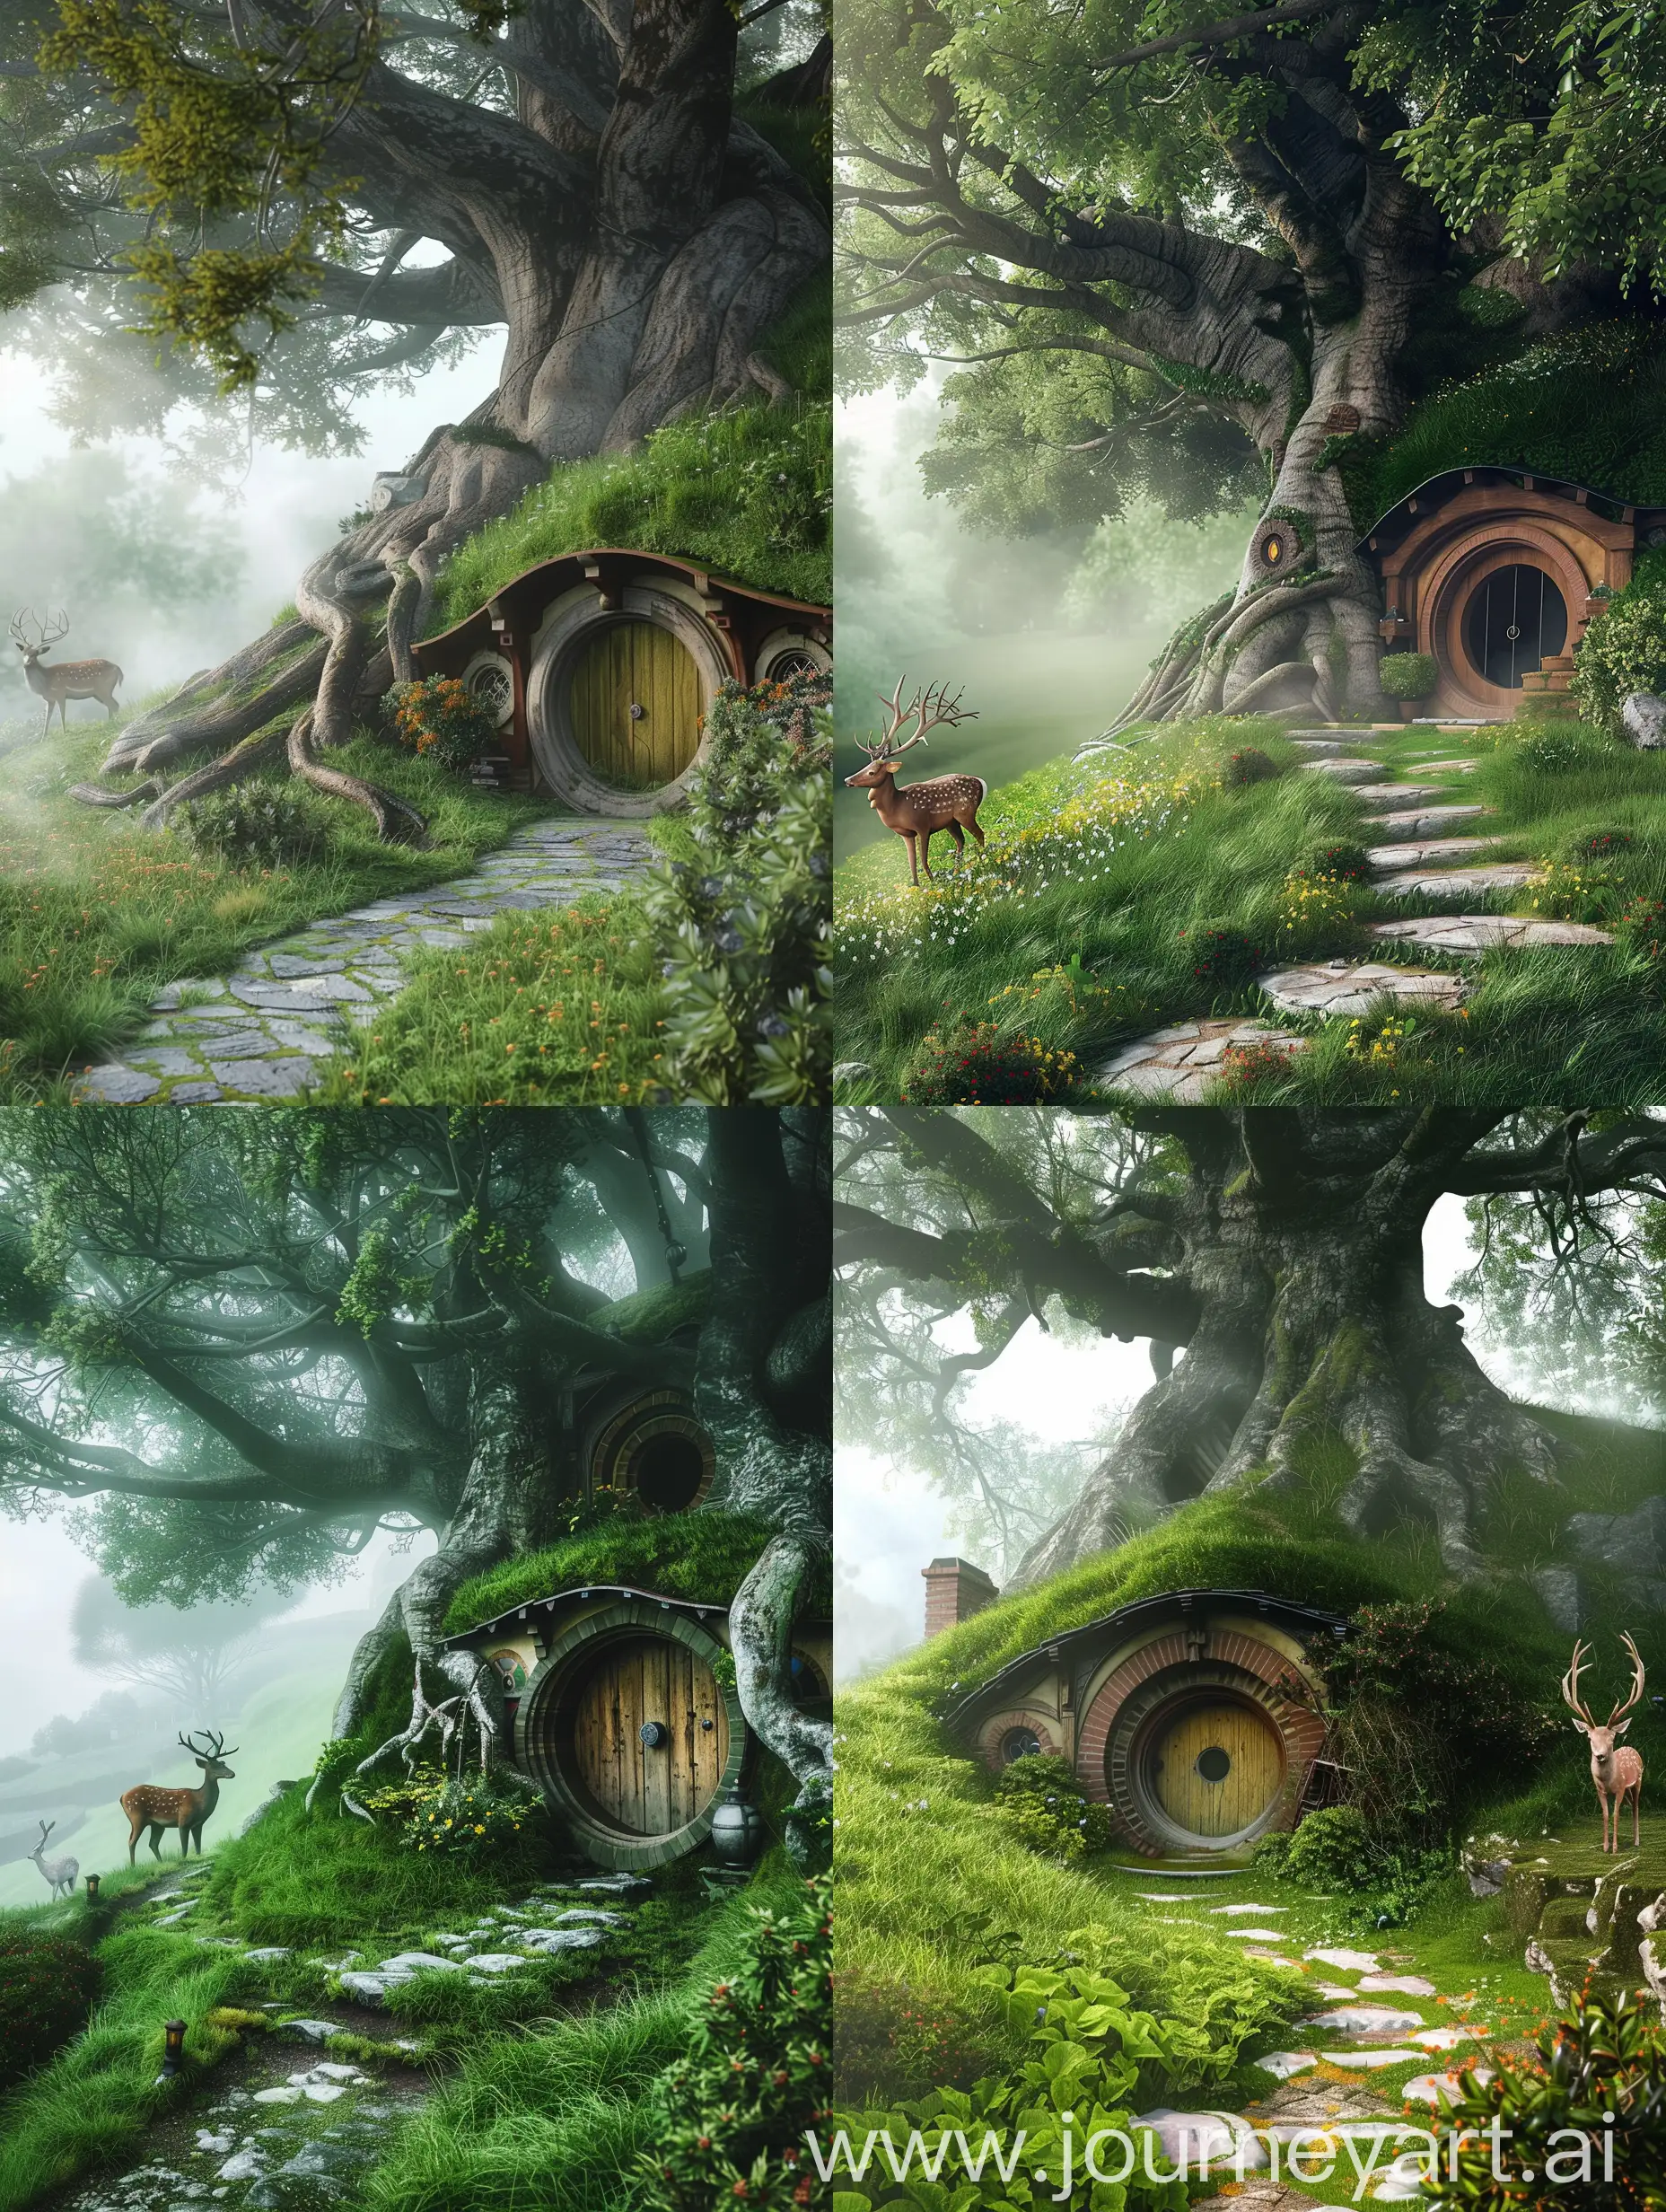 A cozy hobbit-style house built into a grassy hillside with a round door, surrounded by a lush garden, large old tree with thick roots, misty atmosphere, a stone pathway, a deer standing quietly, and a whimsical, fairy-tale feel to the environment.